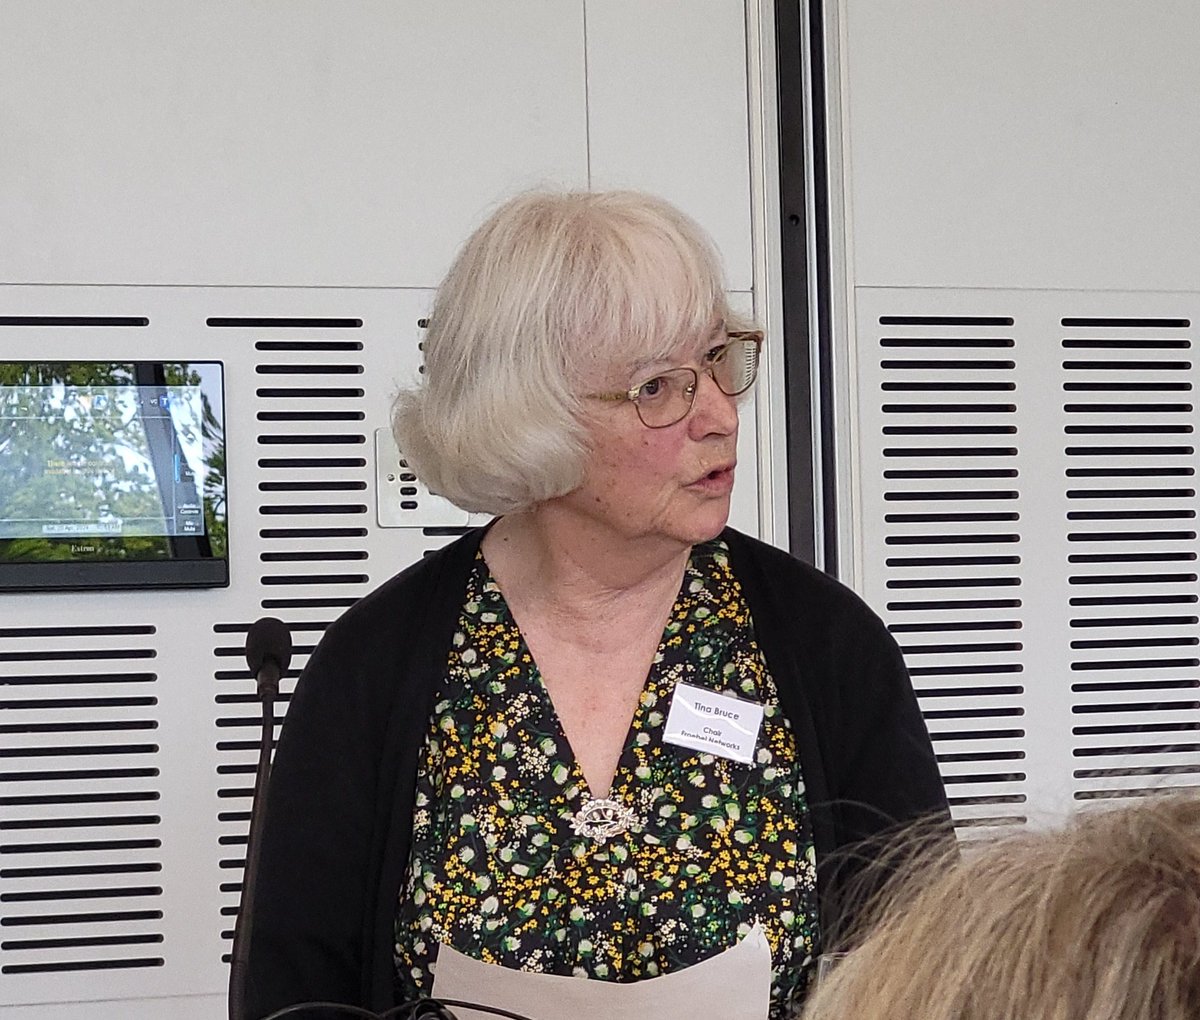 The wonderful Professor Tina Bruce welcomes online colleagues from Japan, China, Turkey, New Zealand, South Africa, Nigeria, Kenya, Ireland, and more. #Froebel24